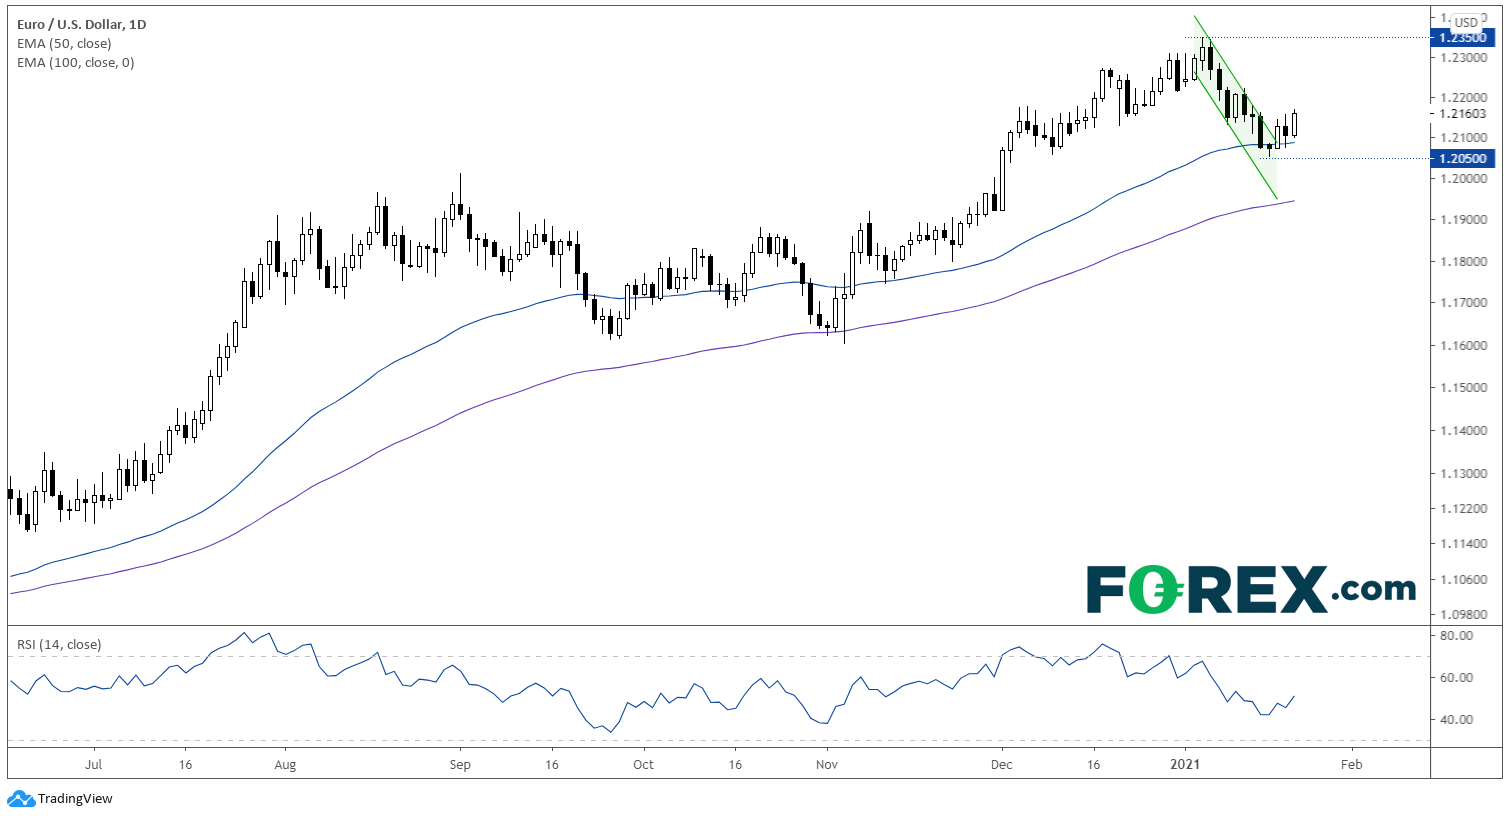 Chart analysis shows FX EUR/USD. Published in January 2021 by FOREX.com